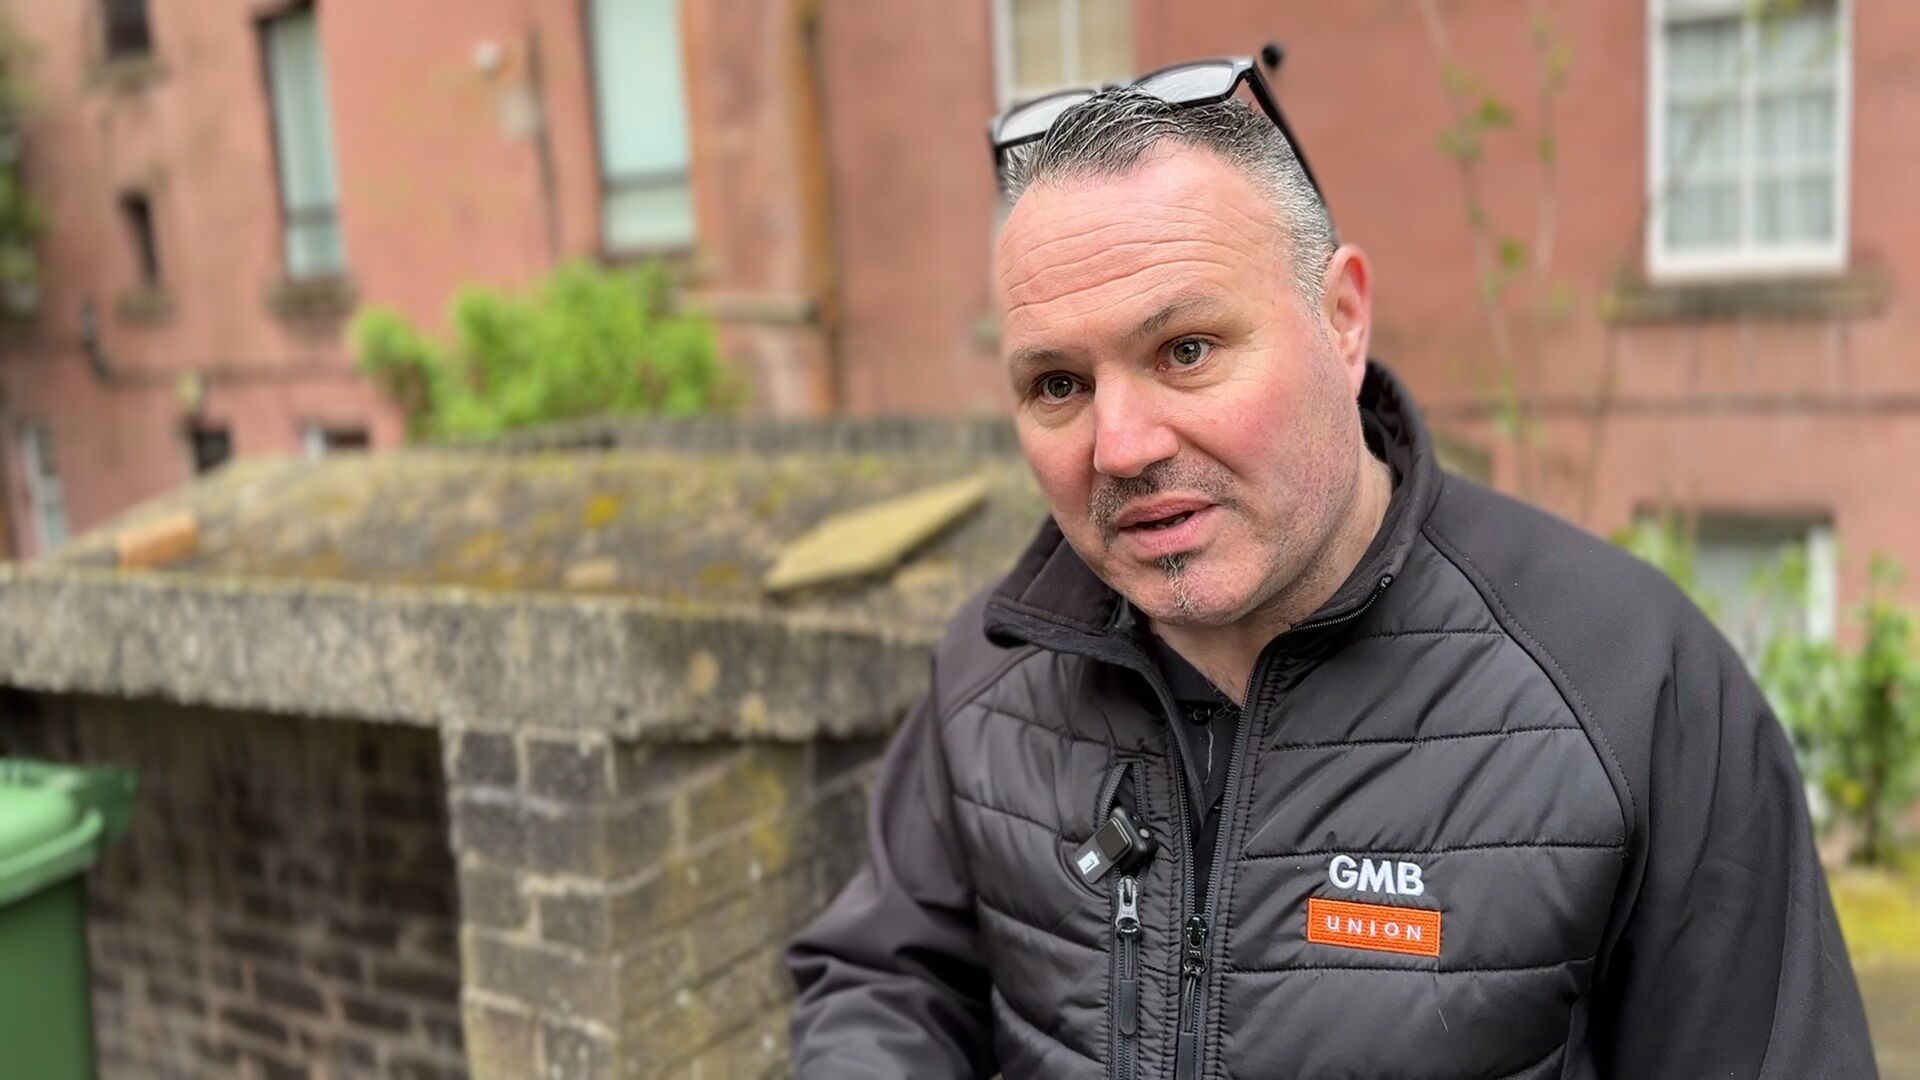 Chris Mitchell, GMB Union, said the rat issue in Glasgow is a public health crisis. 